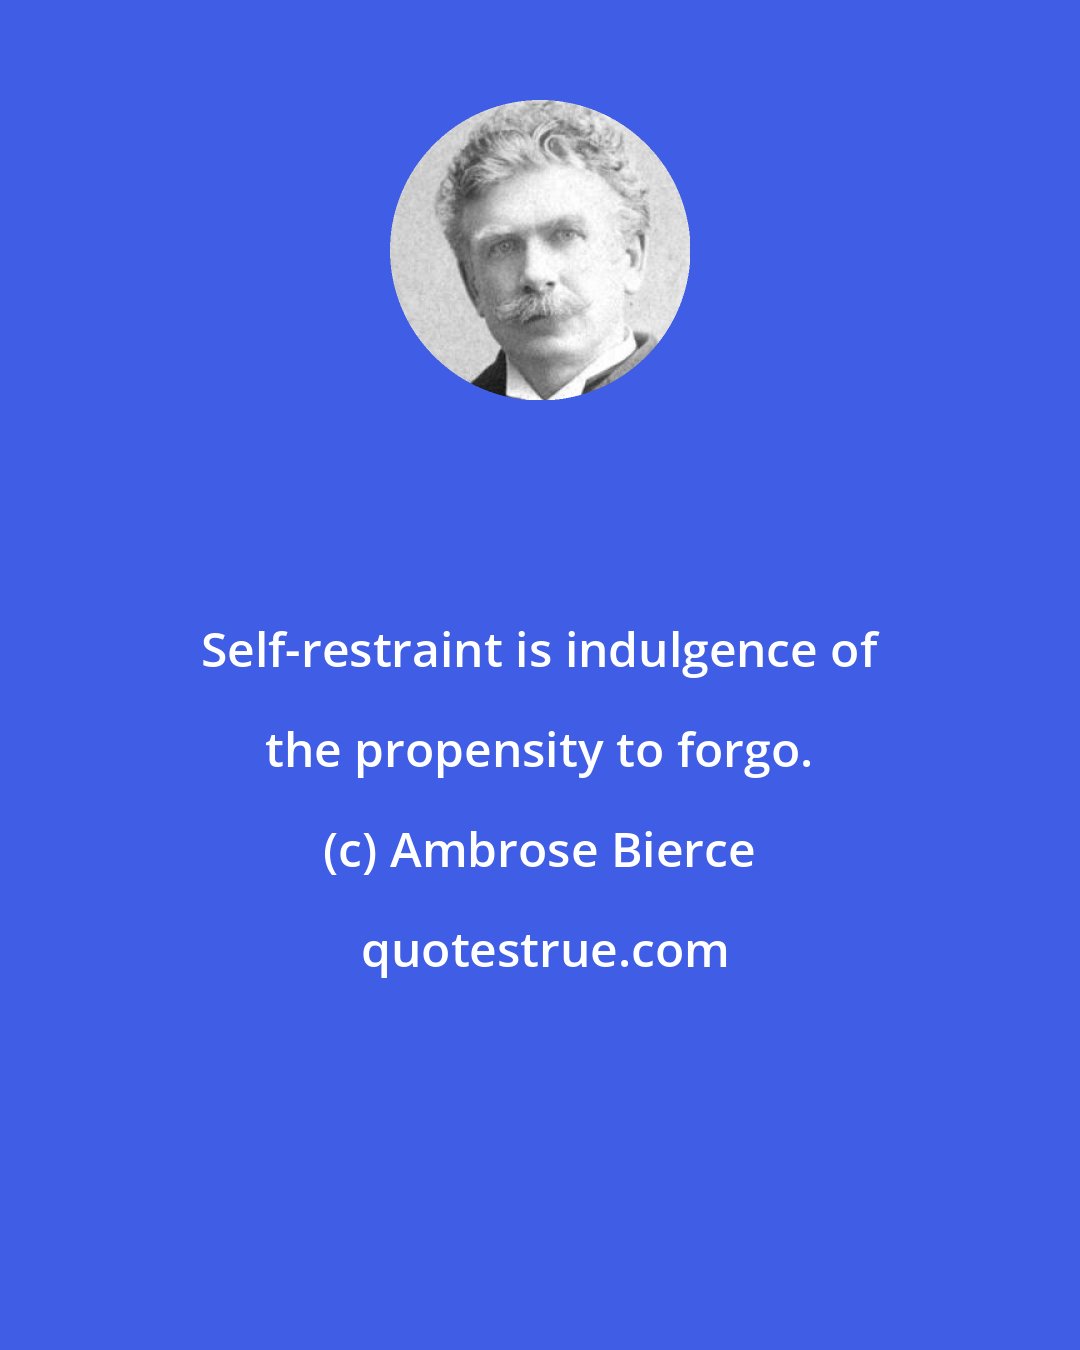 Ambrose Bierce: Self-restraint is indulgence of the propensity to forgo.